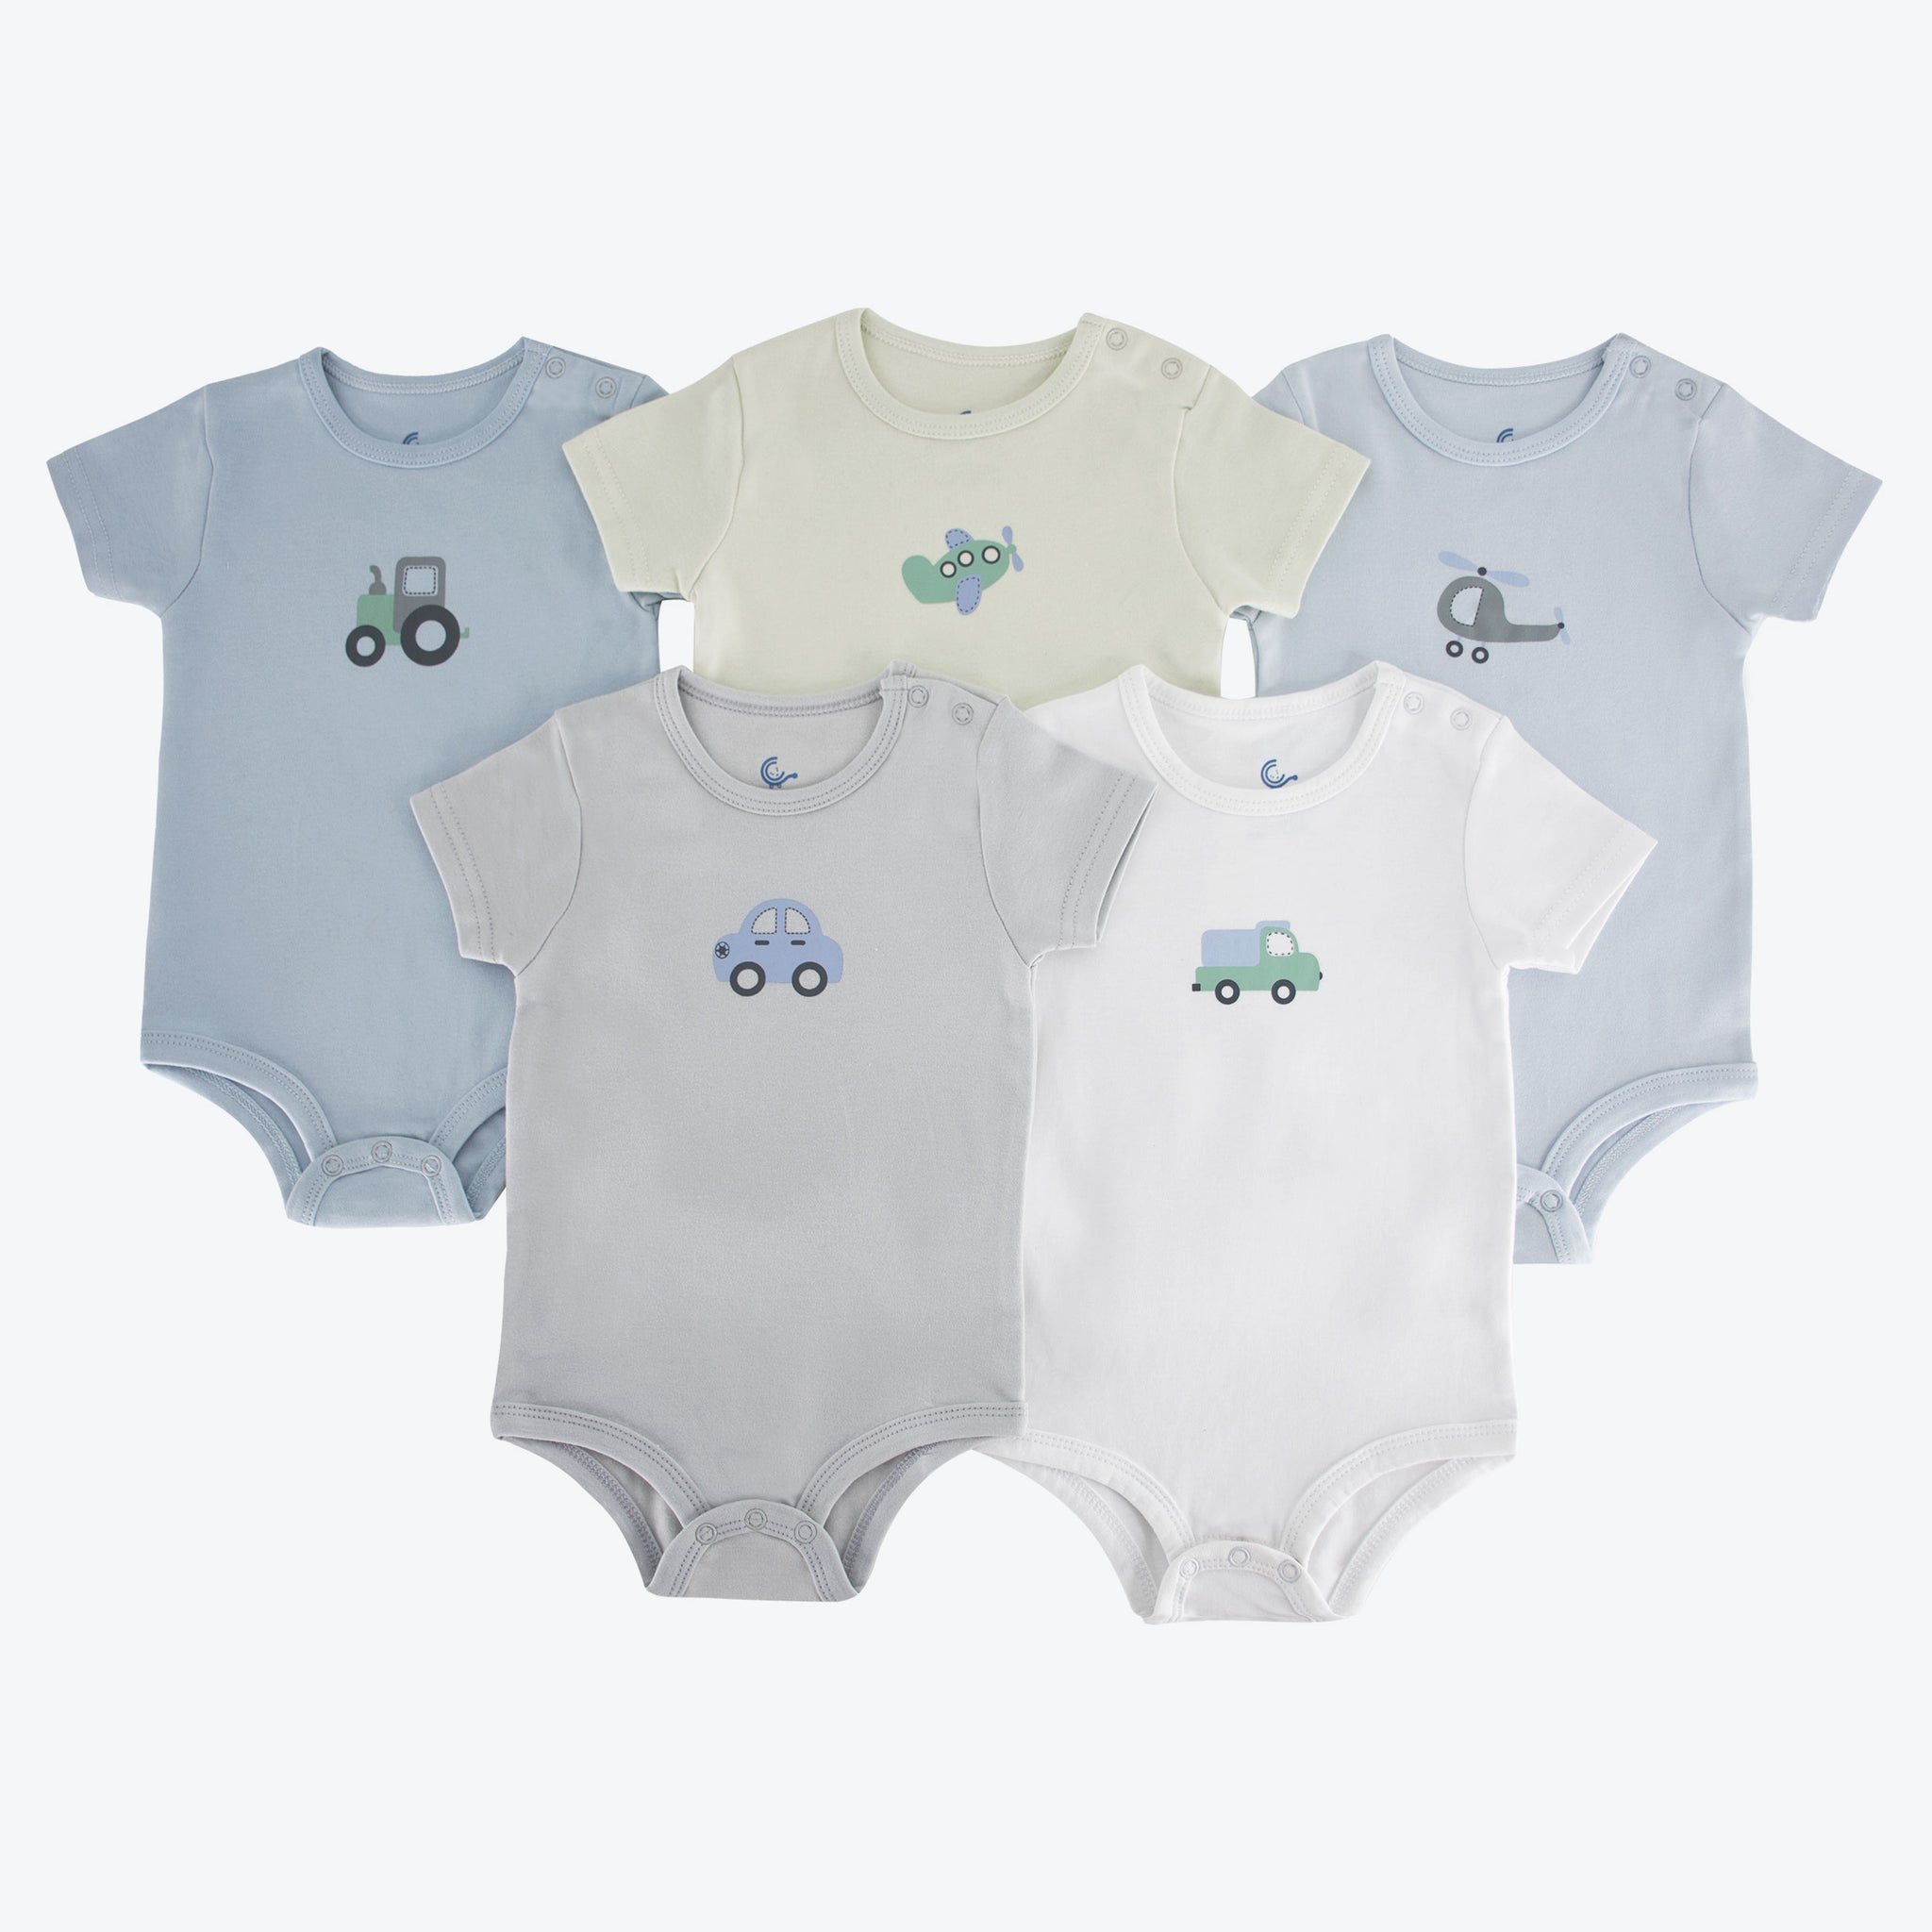 Set of 5 baby bodysuits with cool vehicles